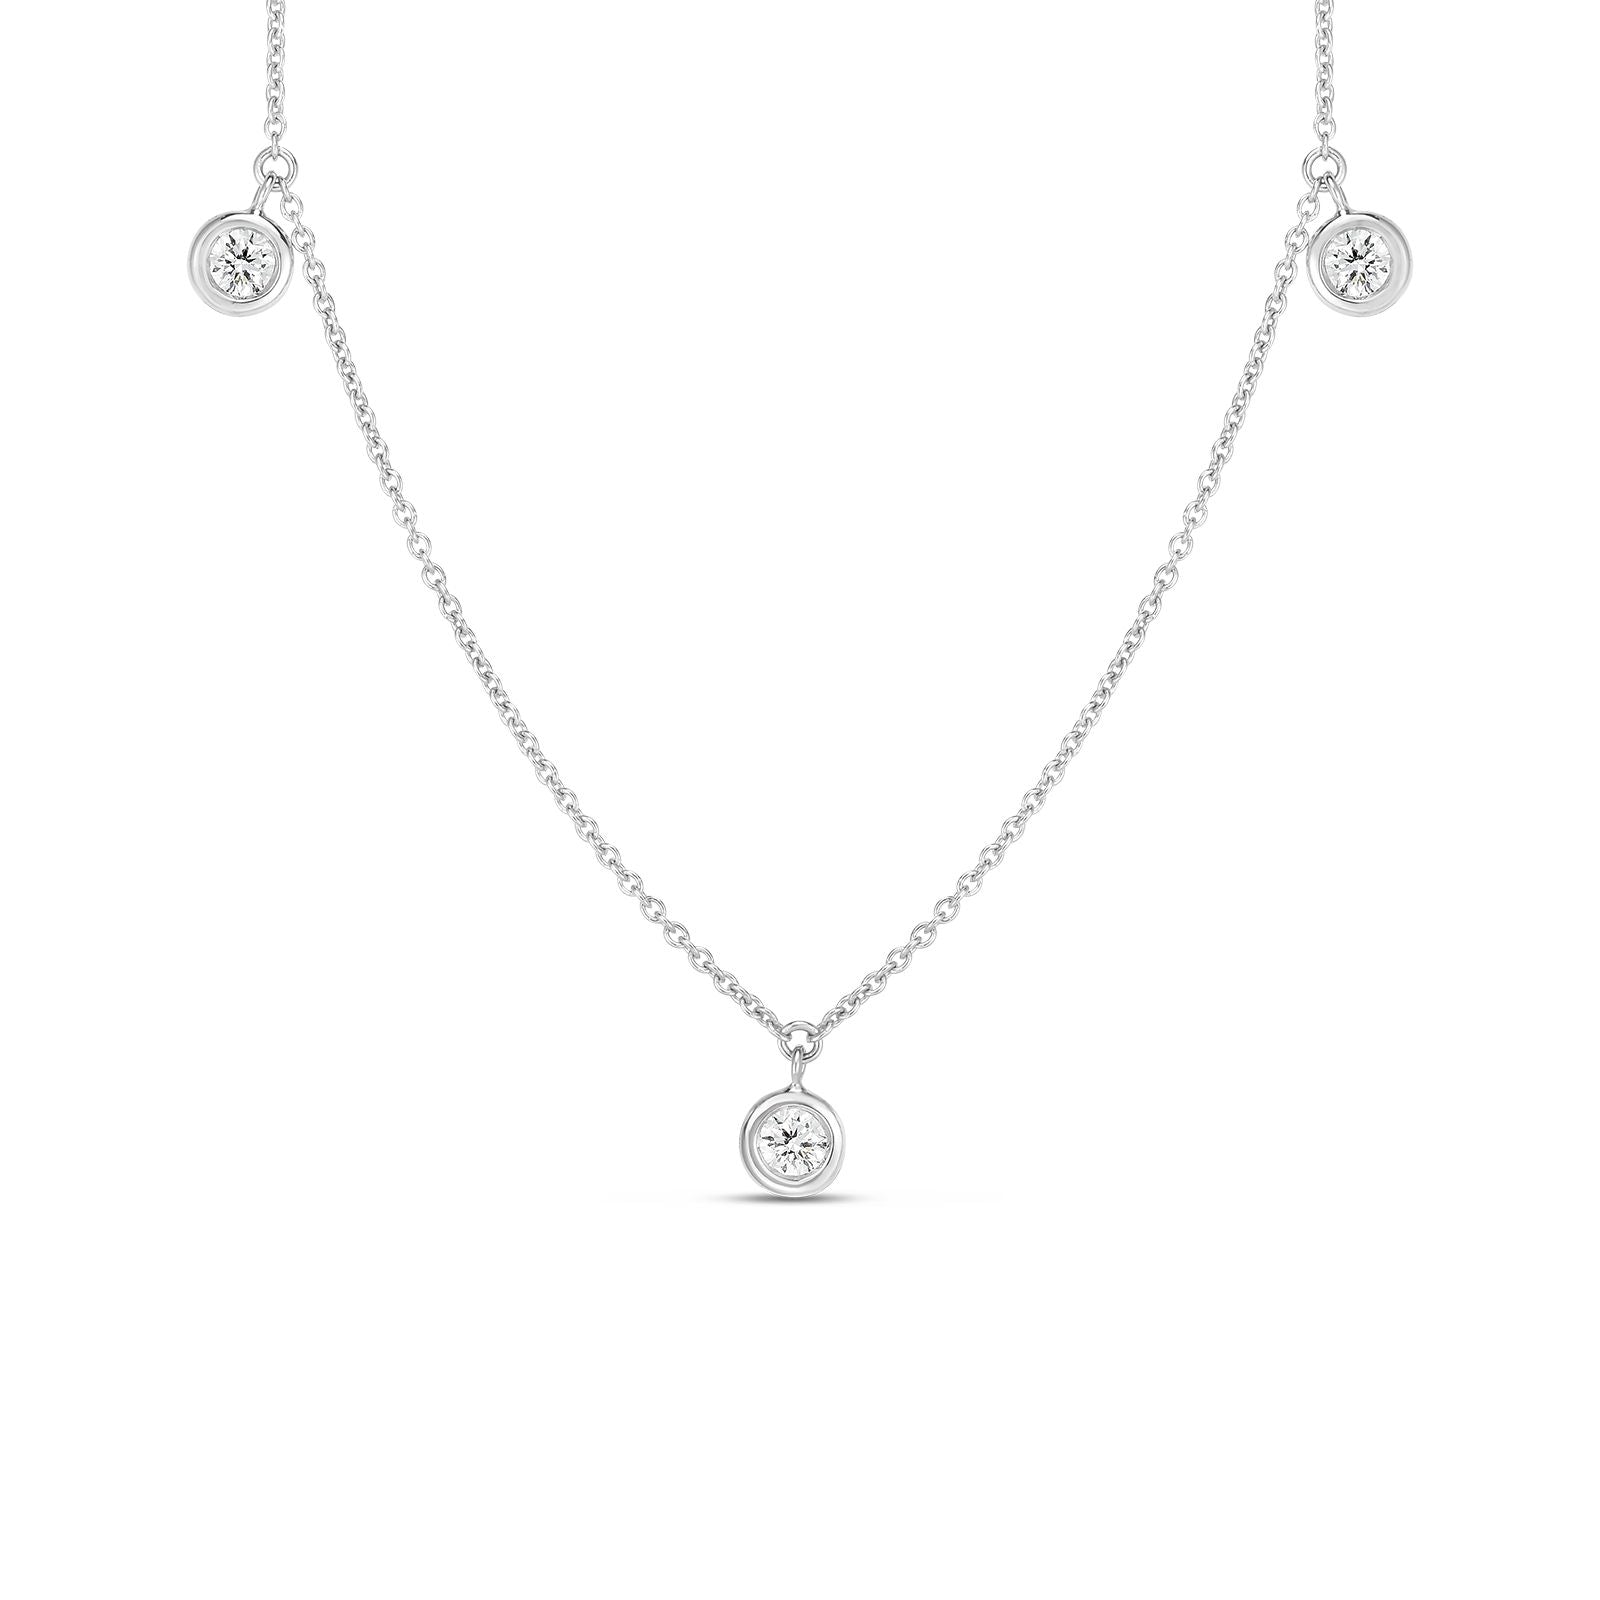 ROBERTO COIN 18KY 3 STATION NECKLACE .14 CT DIA